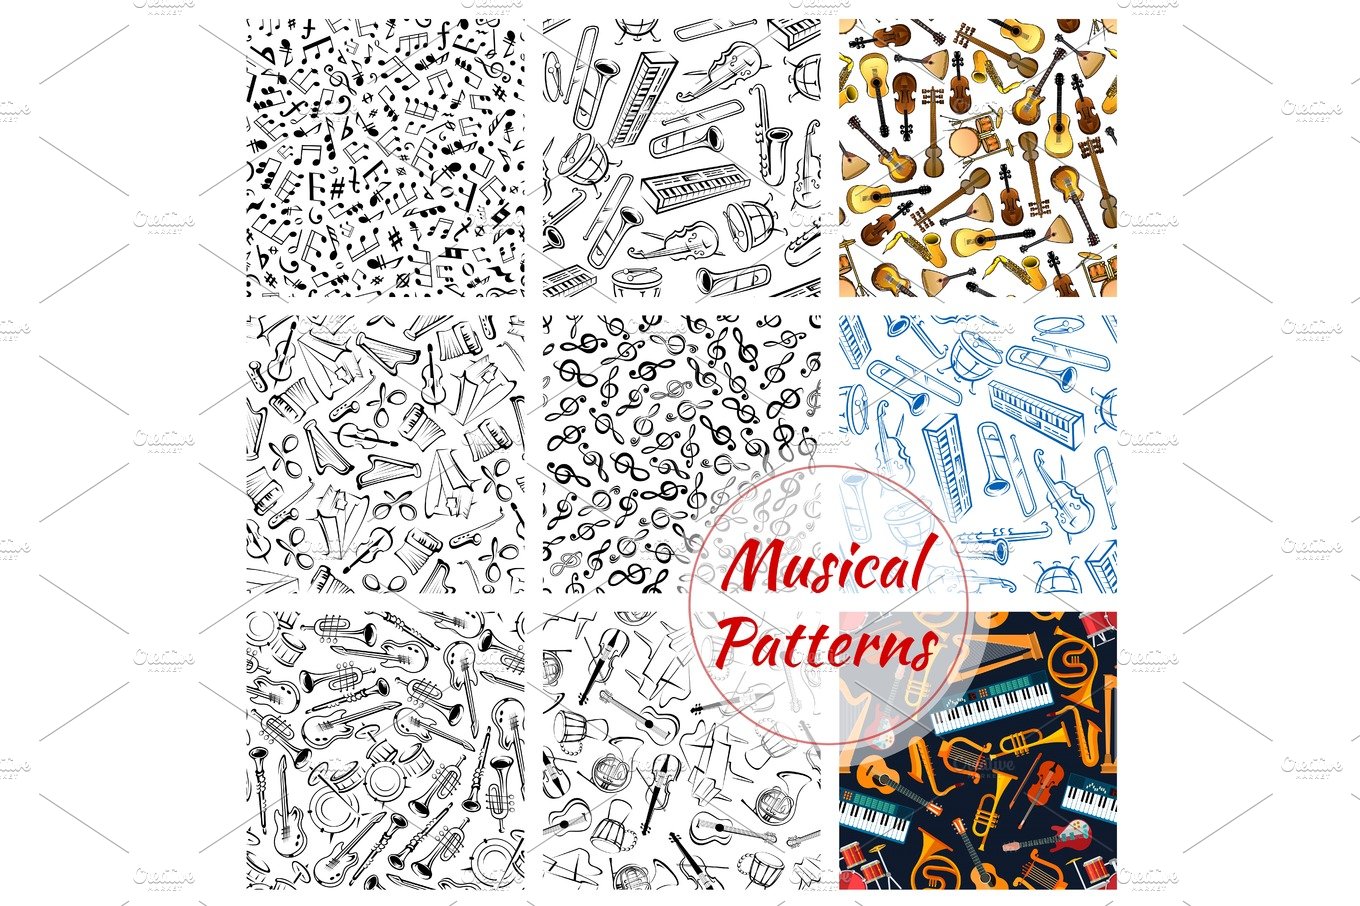 Patterns of musical instruments and music notes cover image.